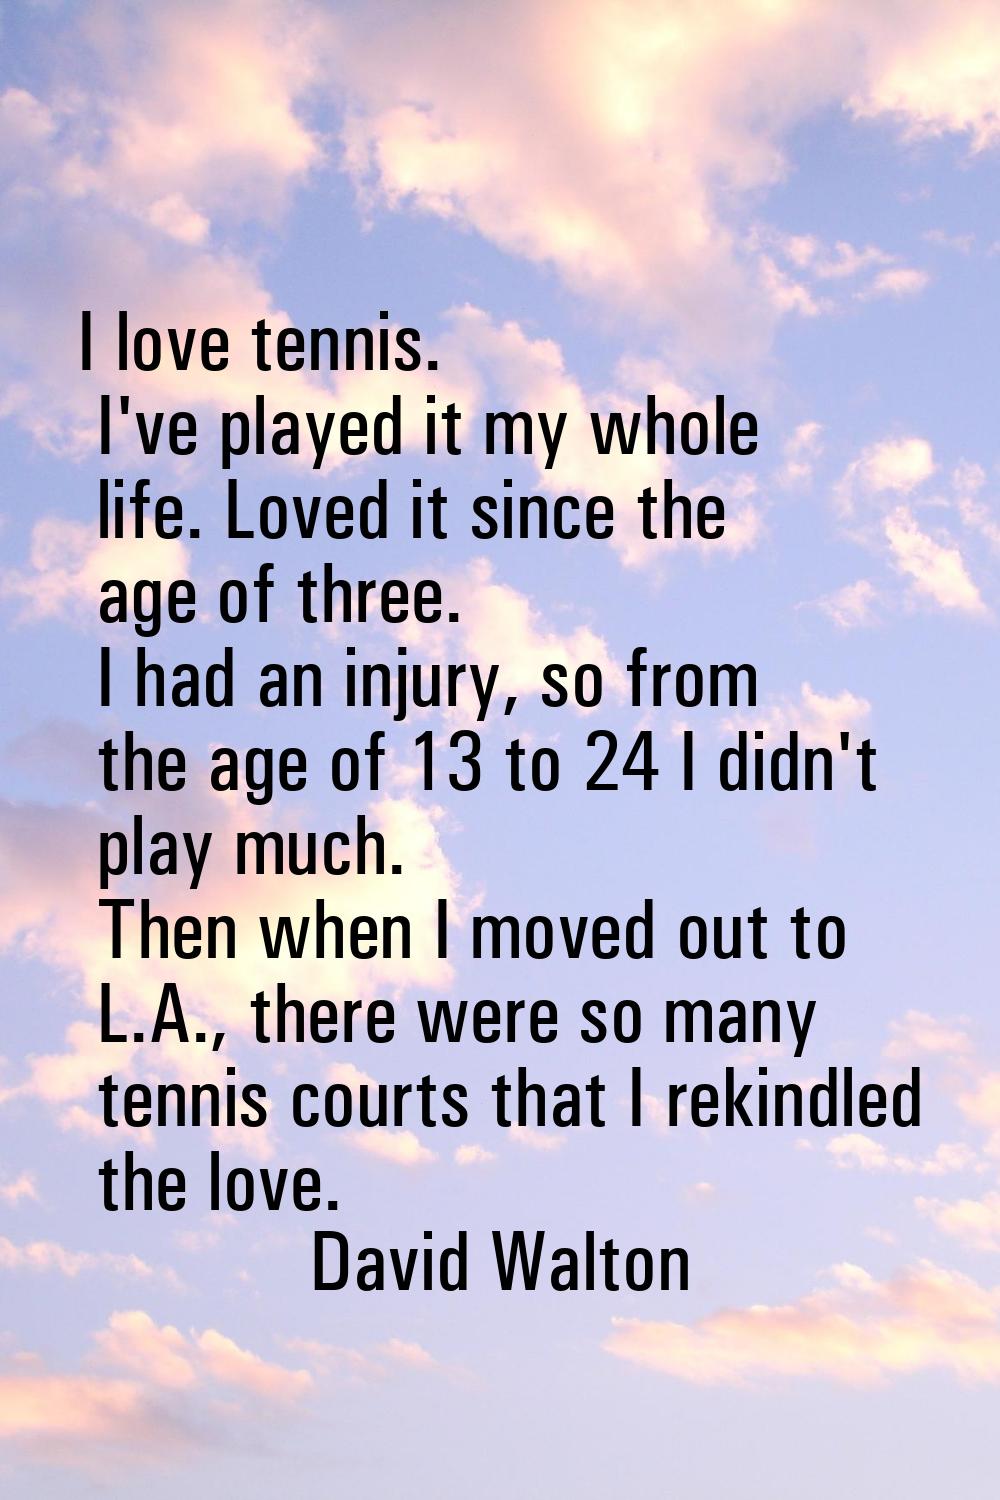 I love tennis. I've played it my whole life. Loved it since the age of three. I had an injury, so f